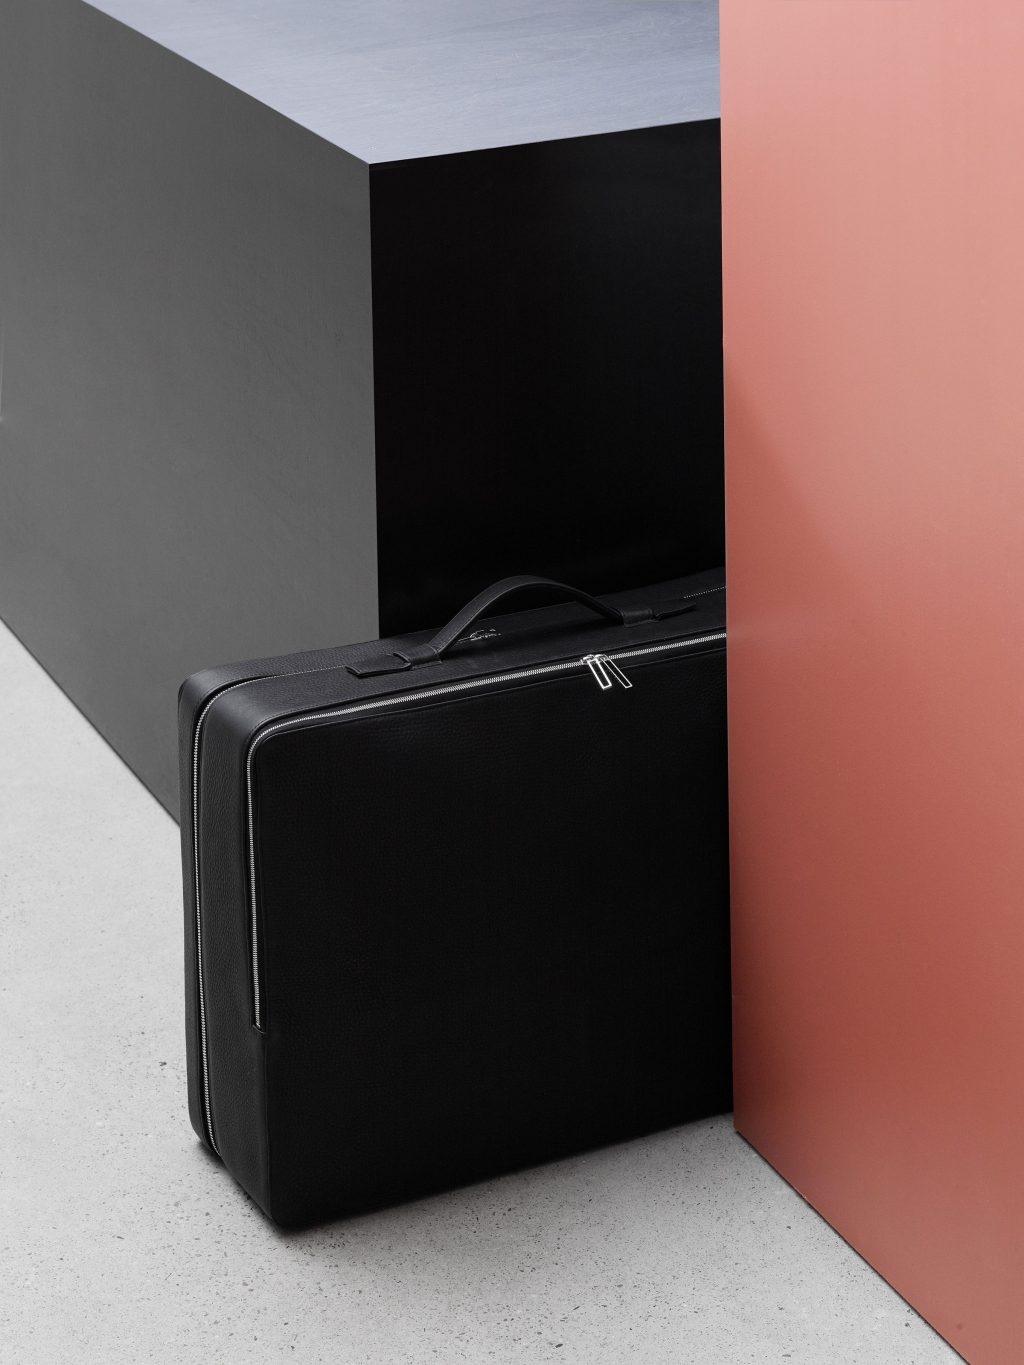 SUIT-CASE — A collaboration between Sir David Chipperfield and TSATSAS